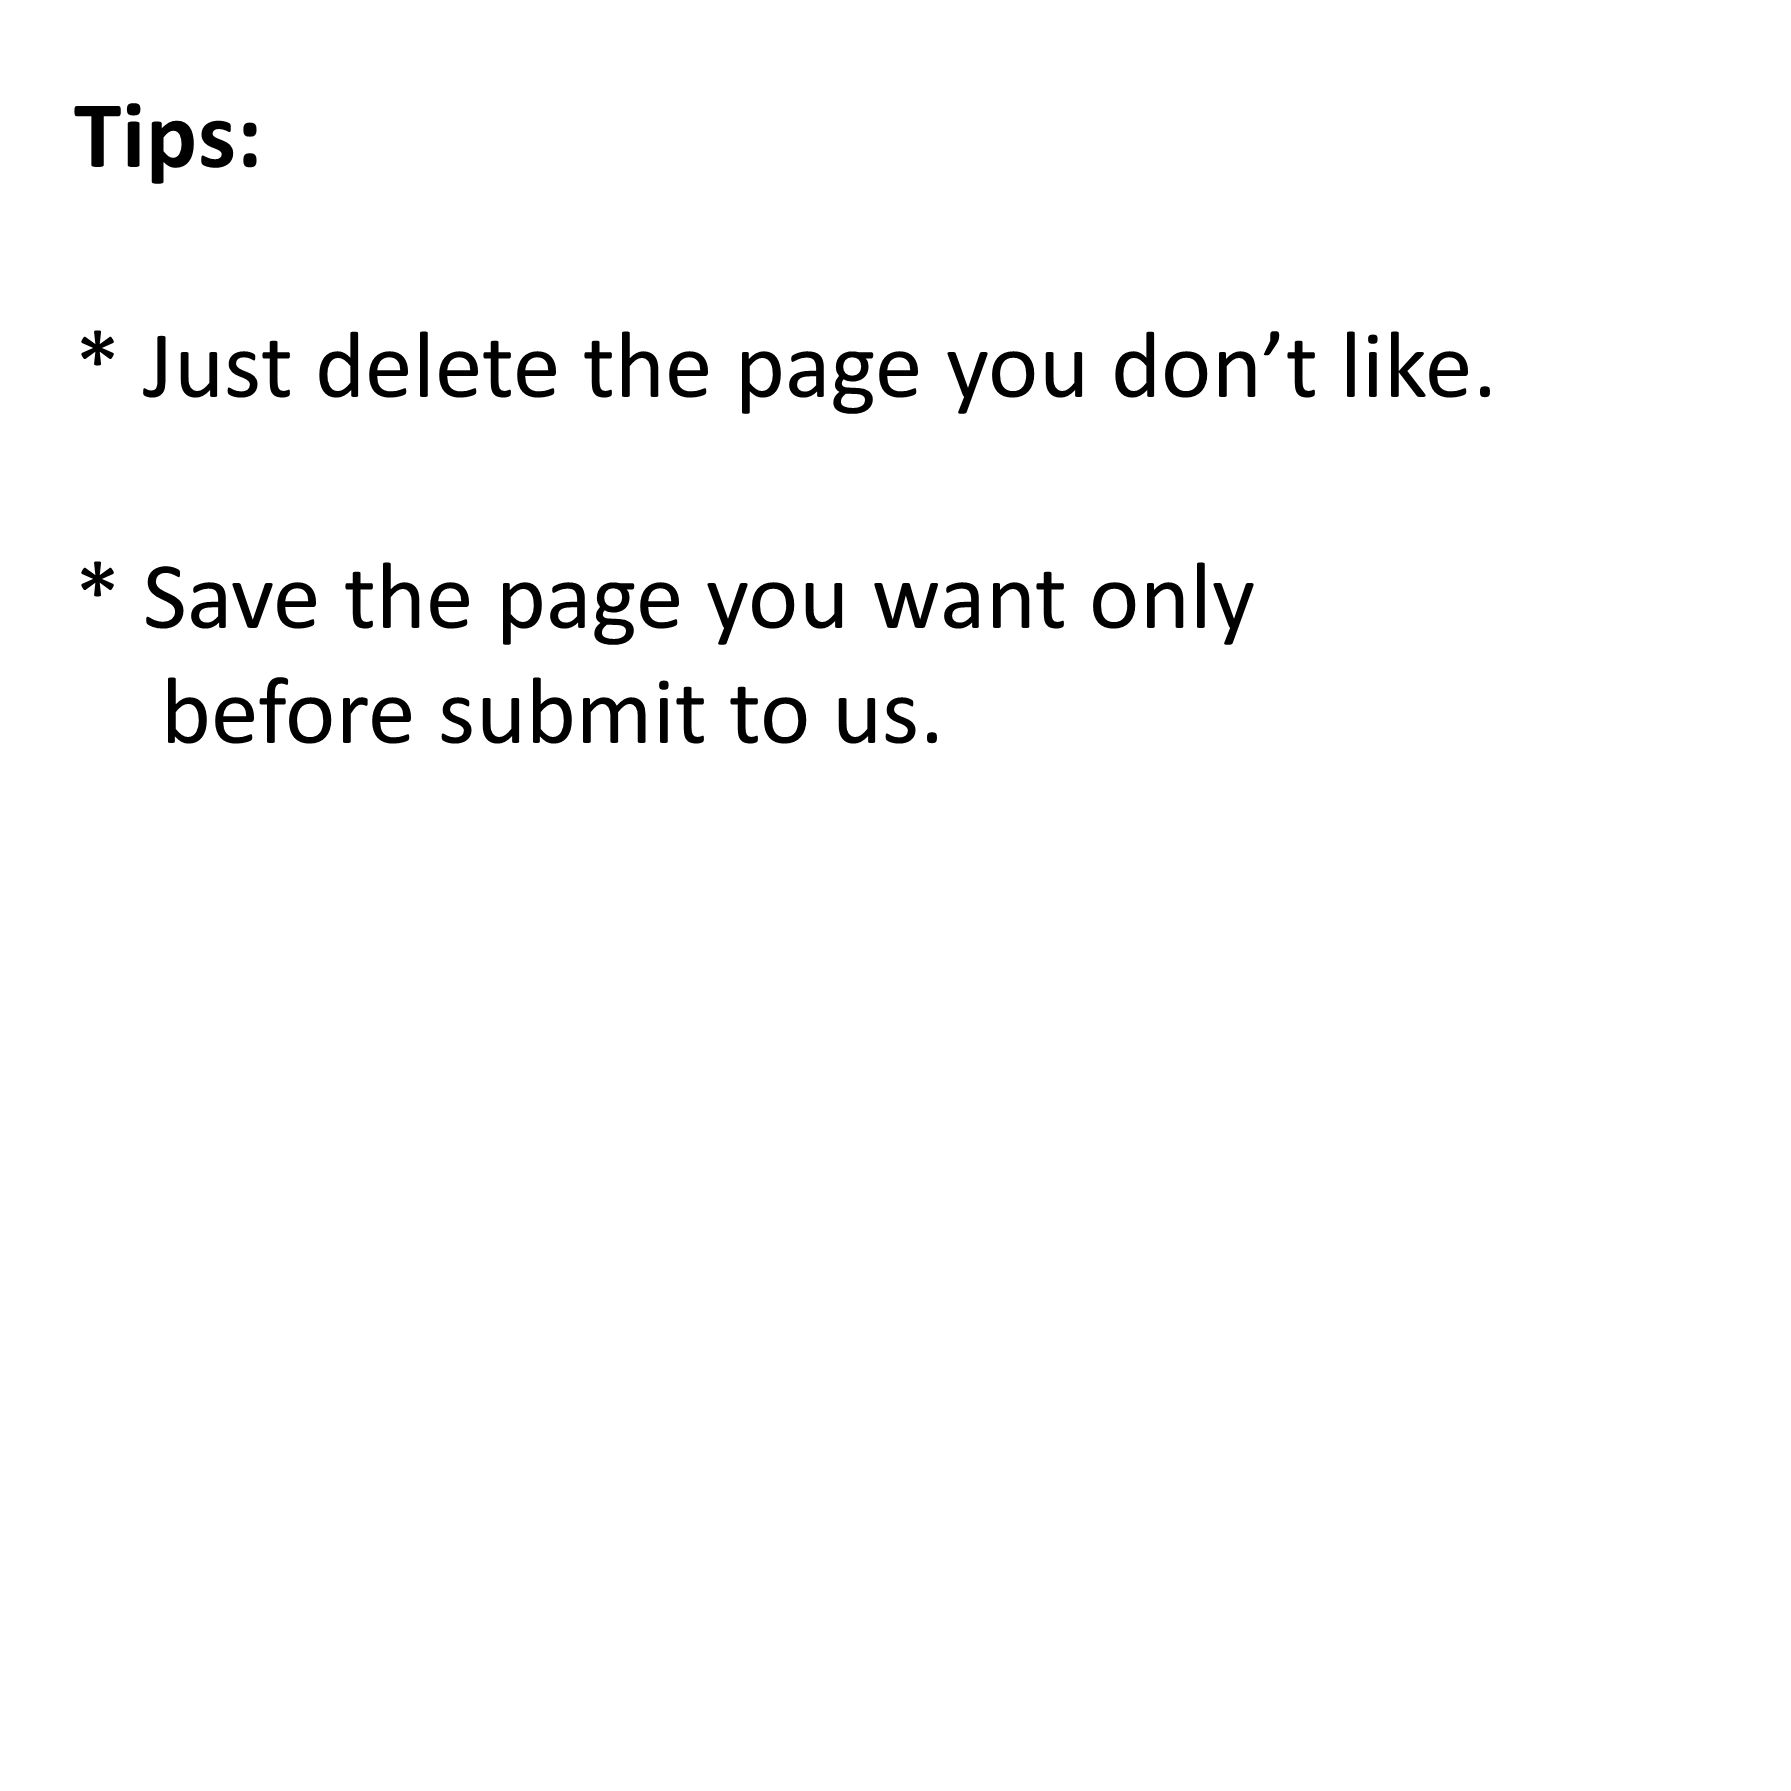 Tips: * Just delete the page you don’t like. * Save the page you want only before submit to us.